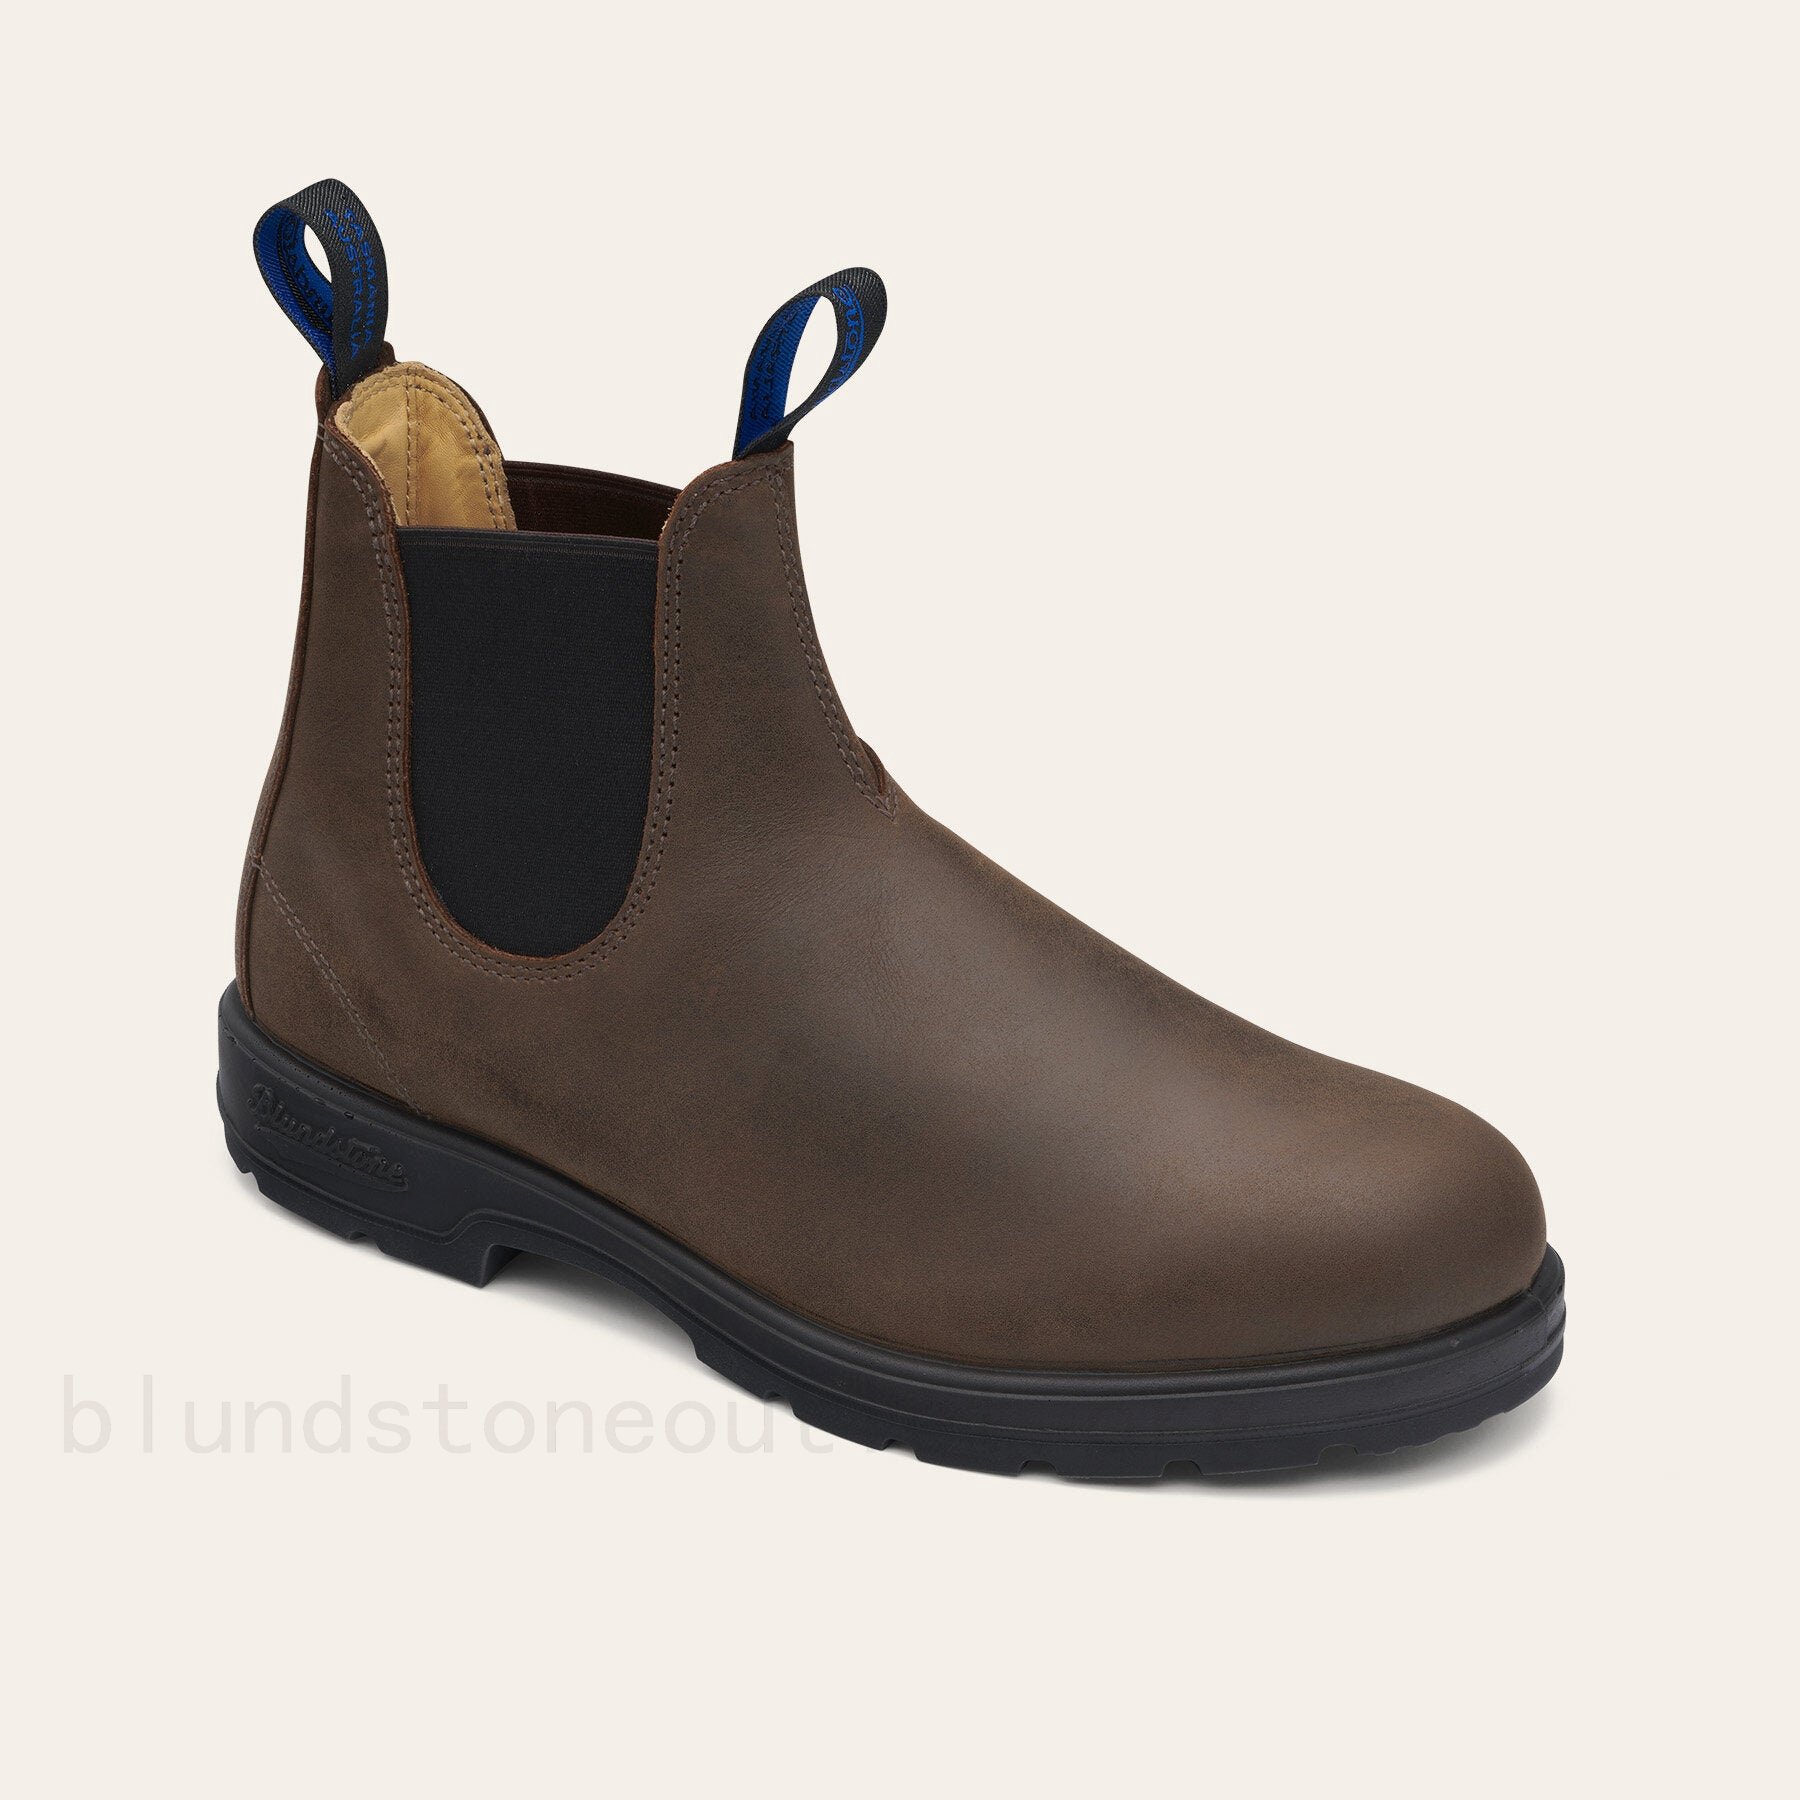 Outlet Shop Online 1477 THERMAL ANTIQUE BROWN blundstone sconto